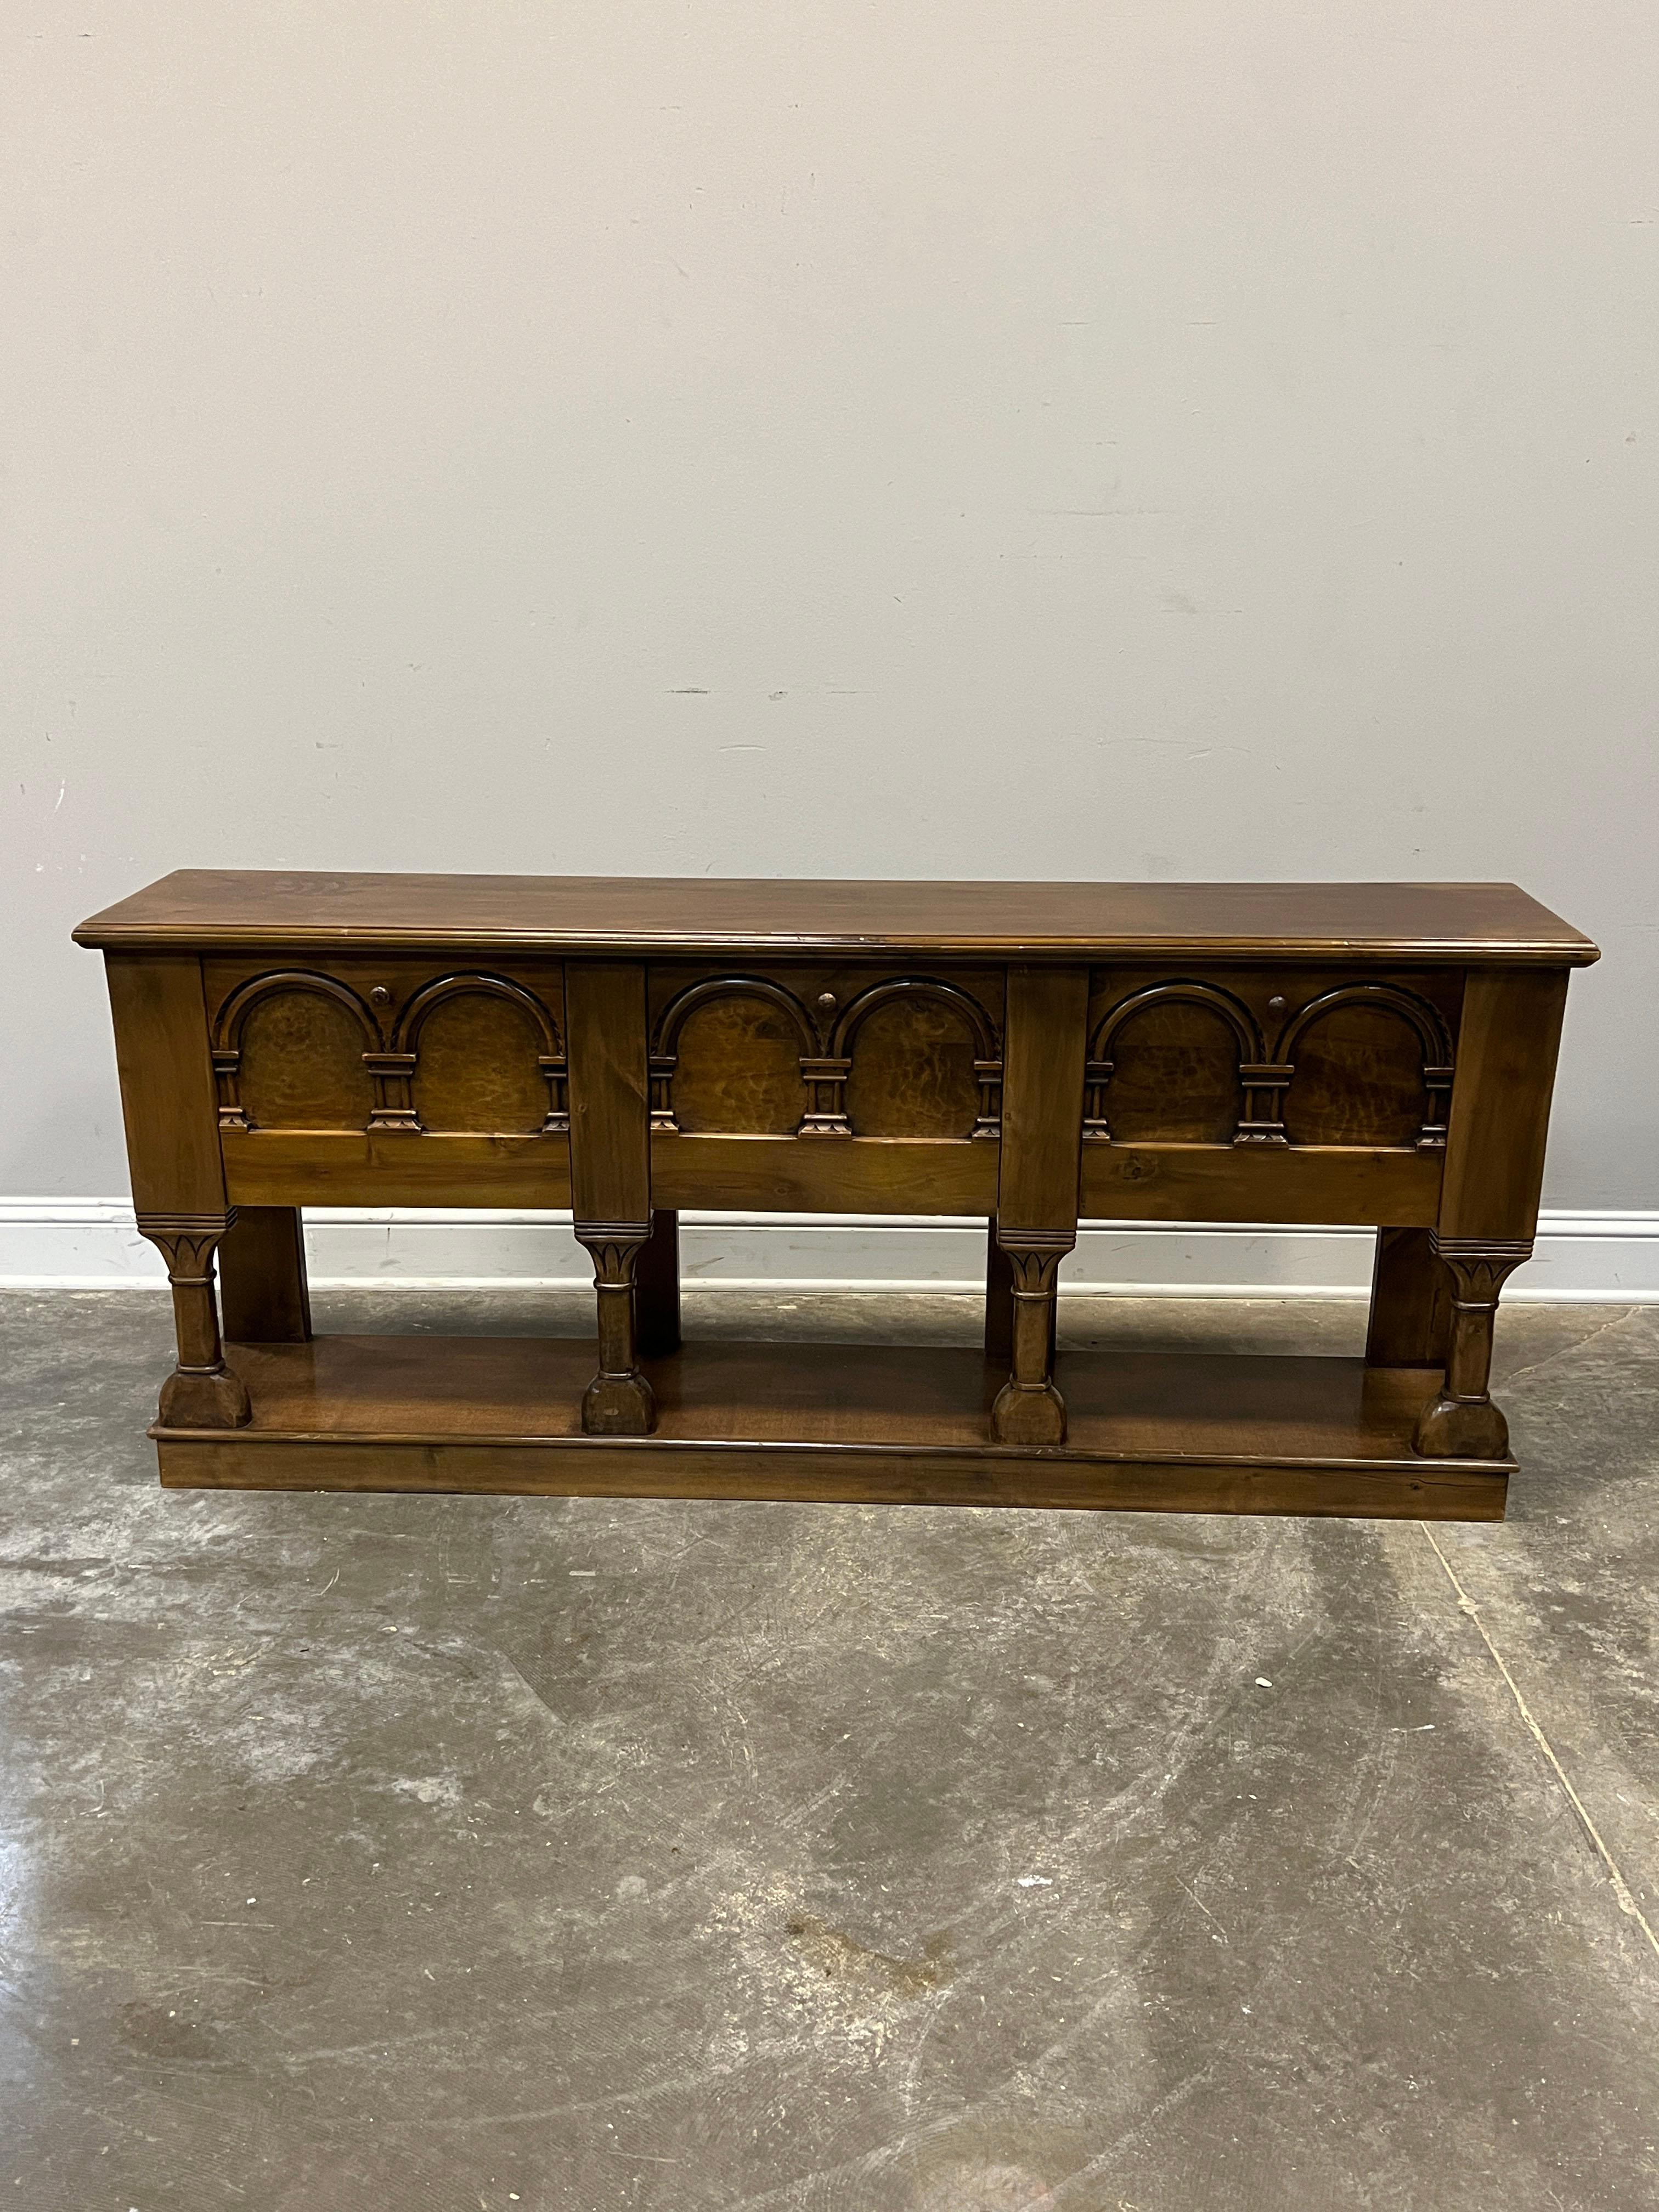 20th C. Spanish style console with drop front compartments